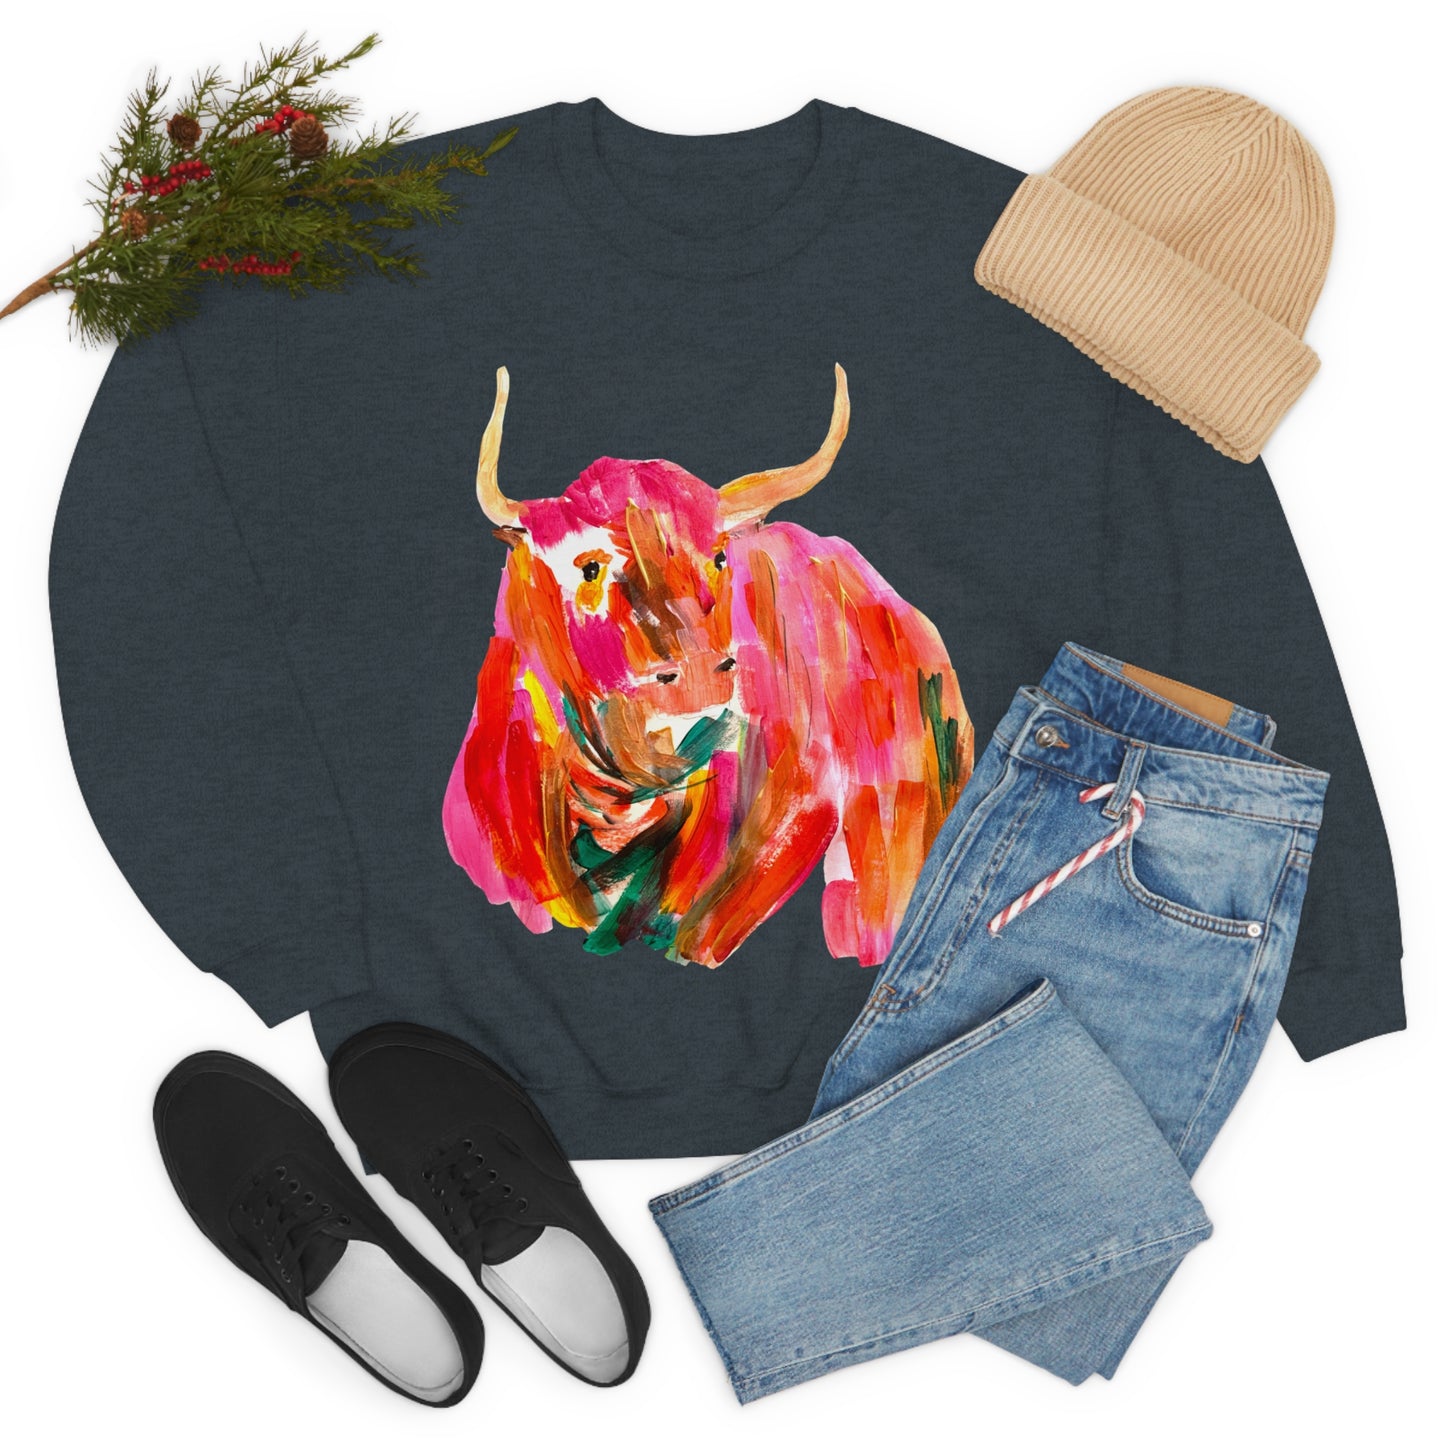 Sweatshirt - Hand Painted Red Desert Bull with Pop Color by Madness and Clarity